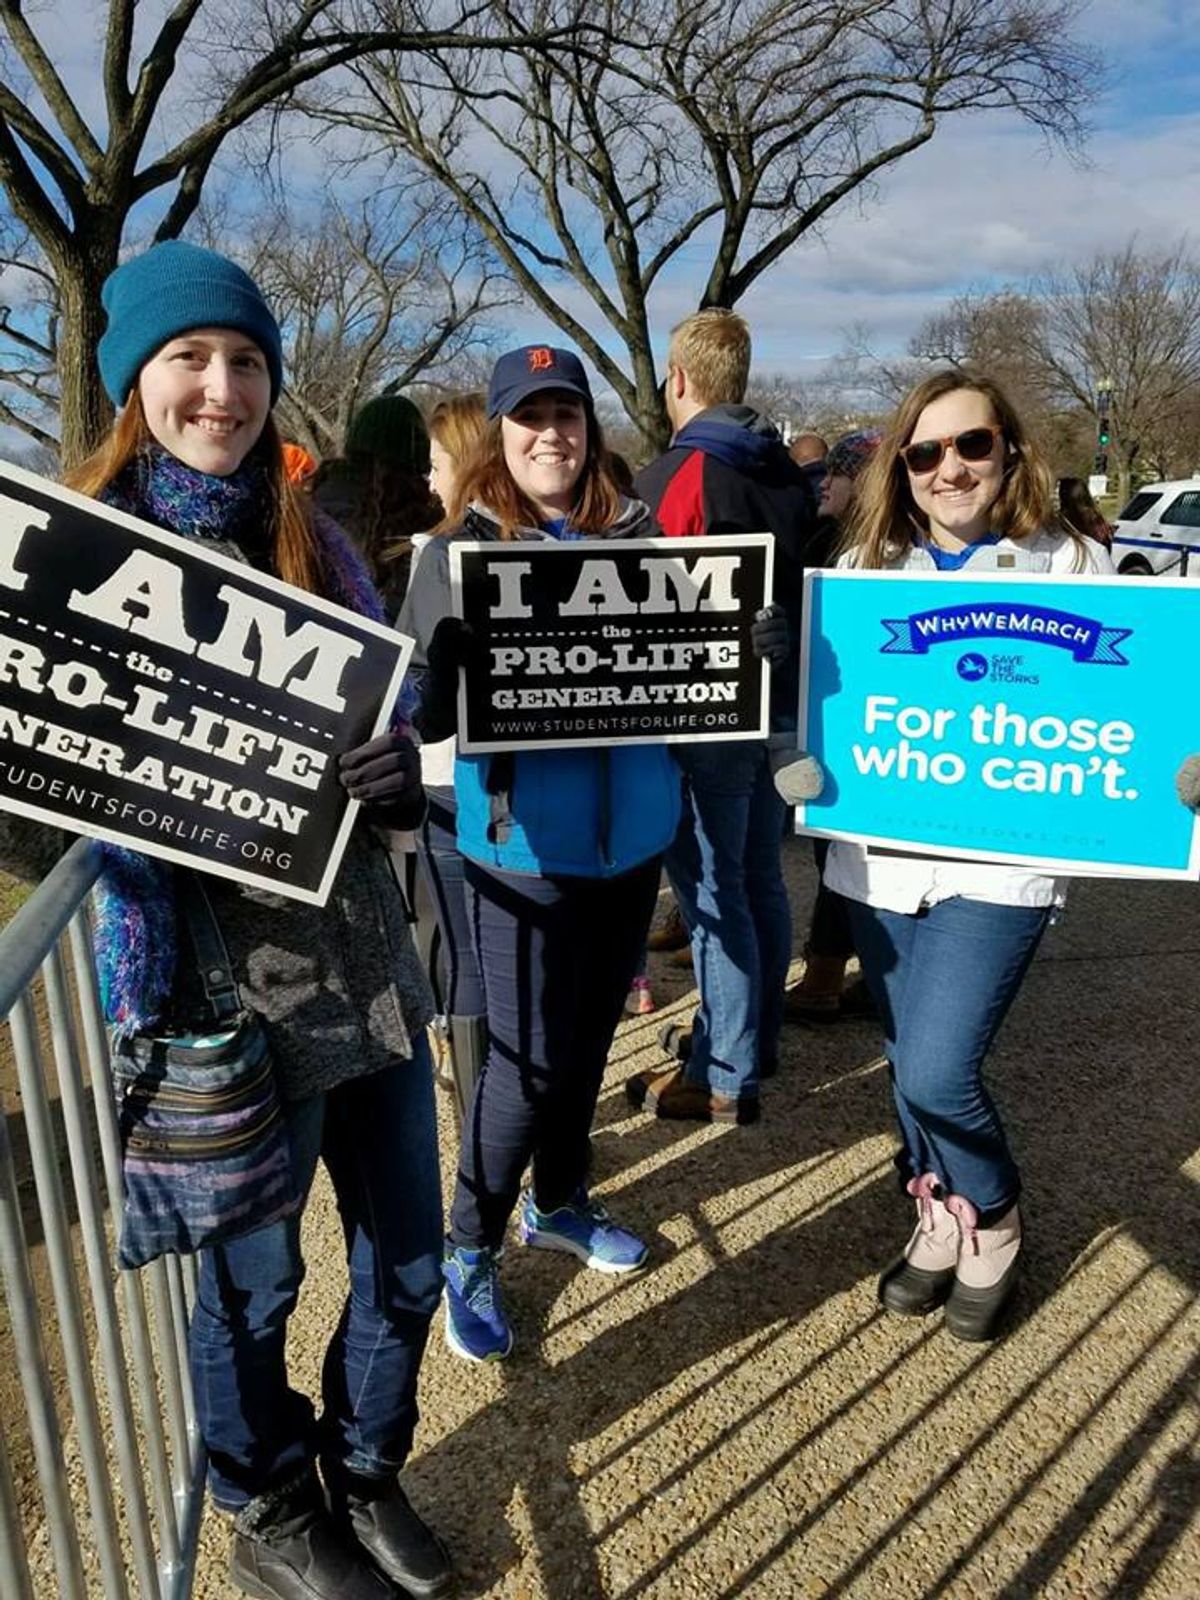 The Real March For Life